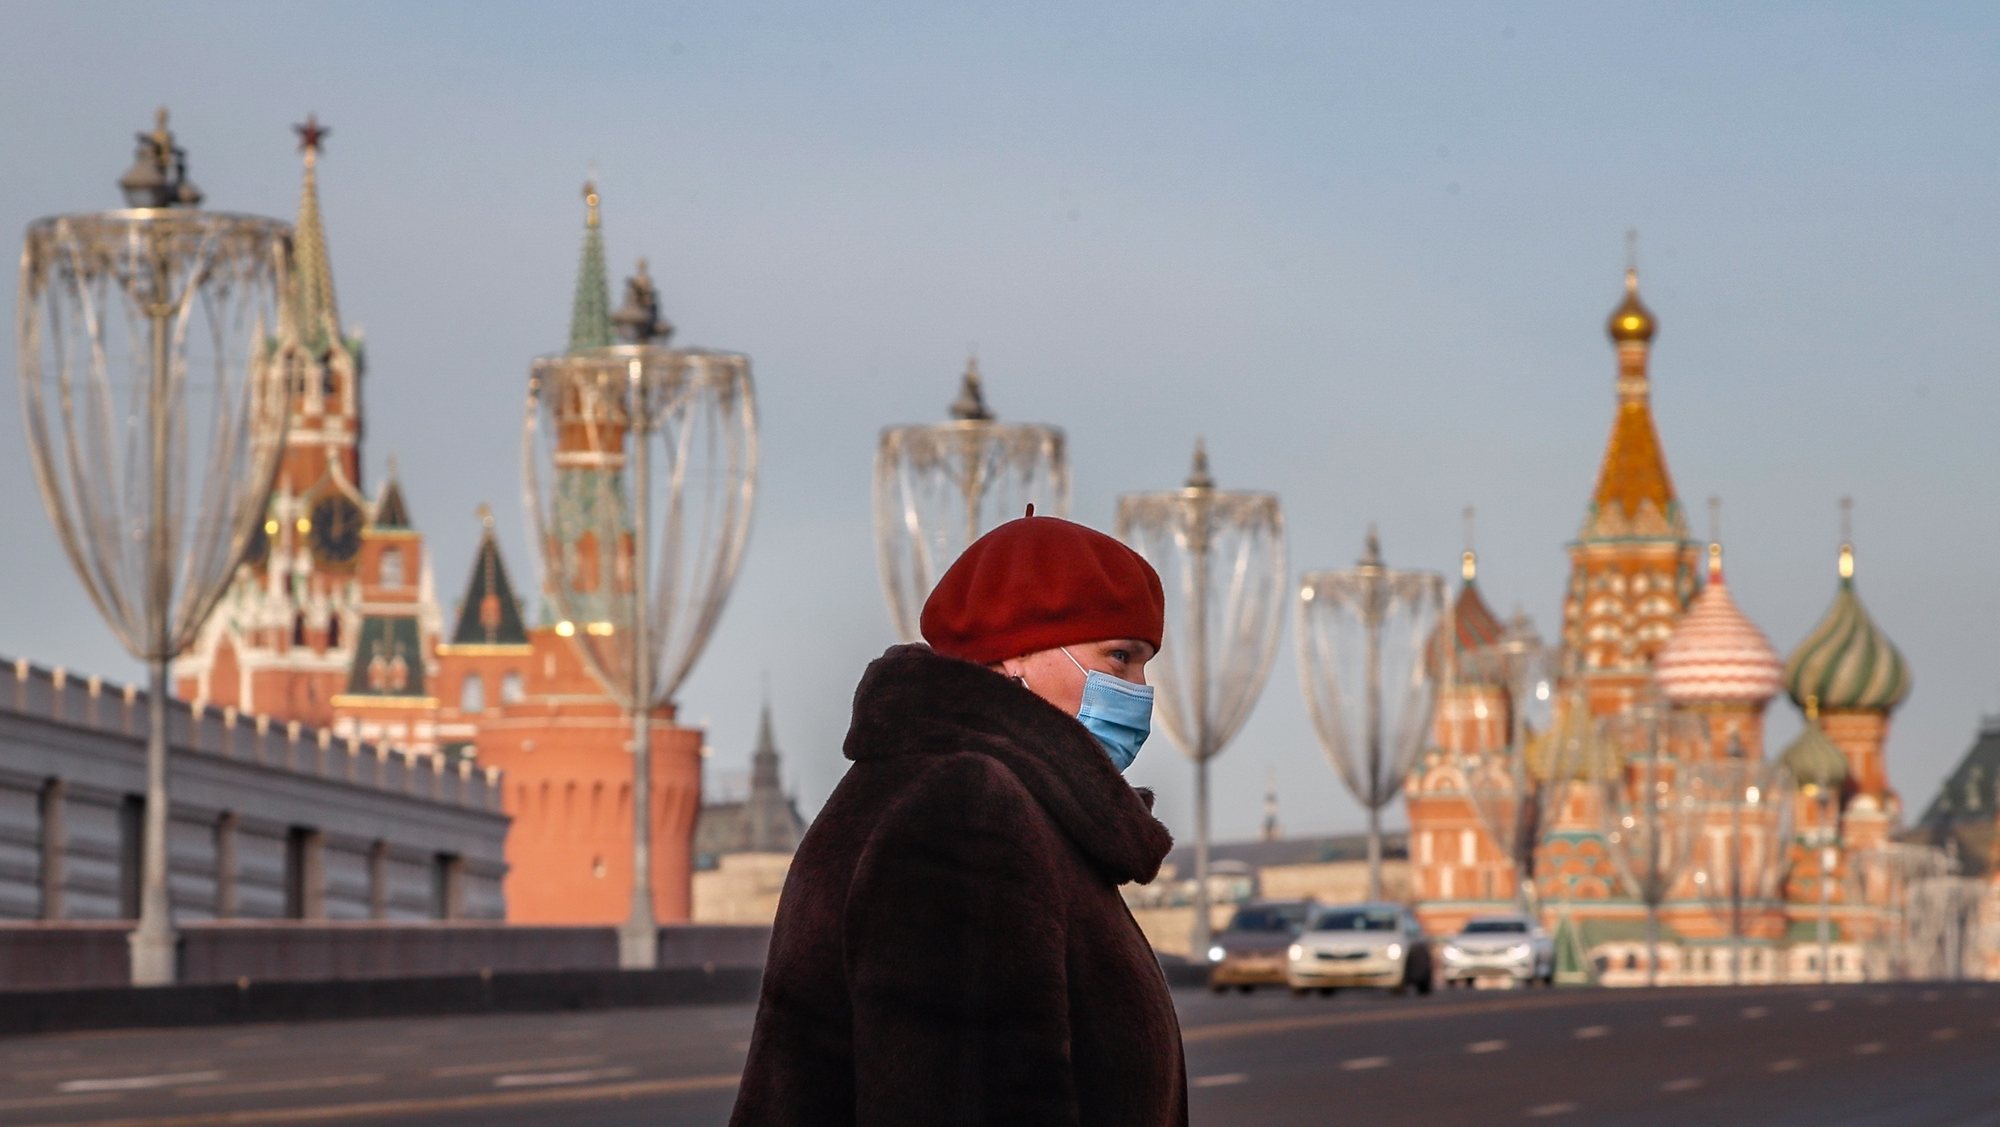 epa08877228 Russian woman wearing protective face mask walks on the street in front of Kremlin in Moscow, Russia 11 December 2020. According to official inforrmation, 613 people infected with coronavirus passed away on 11 December in Russia.  EPA/YURI KOCHETKOV